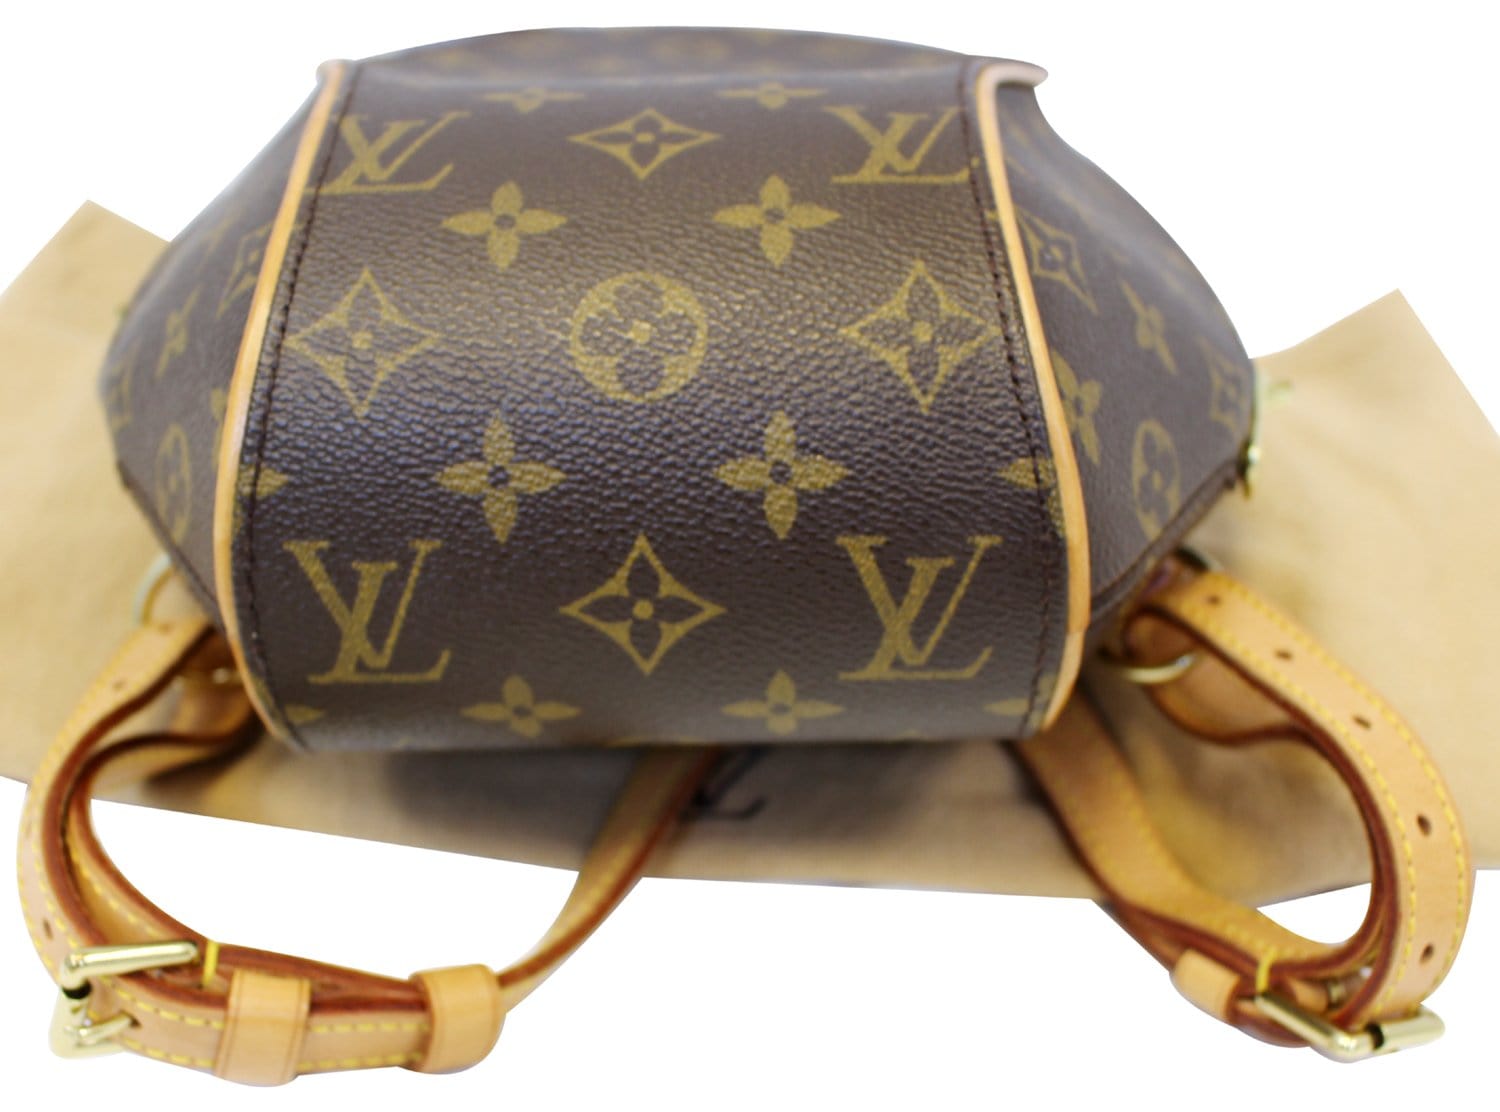 Lv Backpack For Women  Natural Resource Department